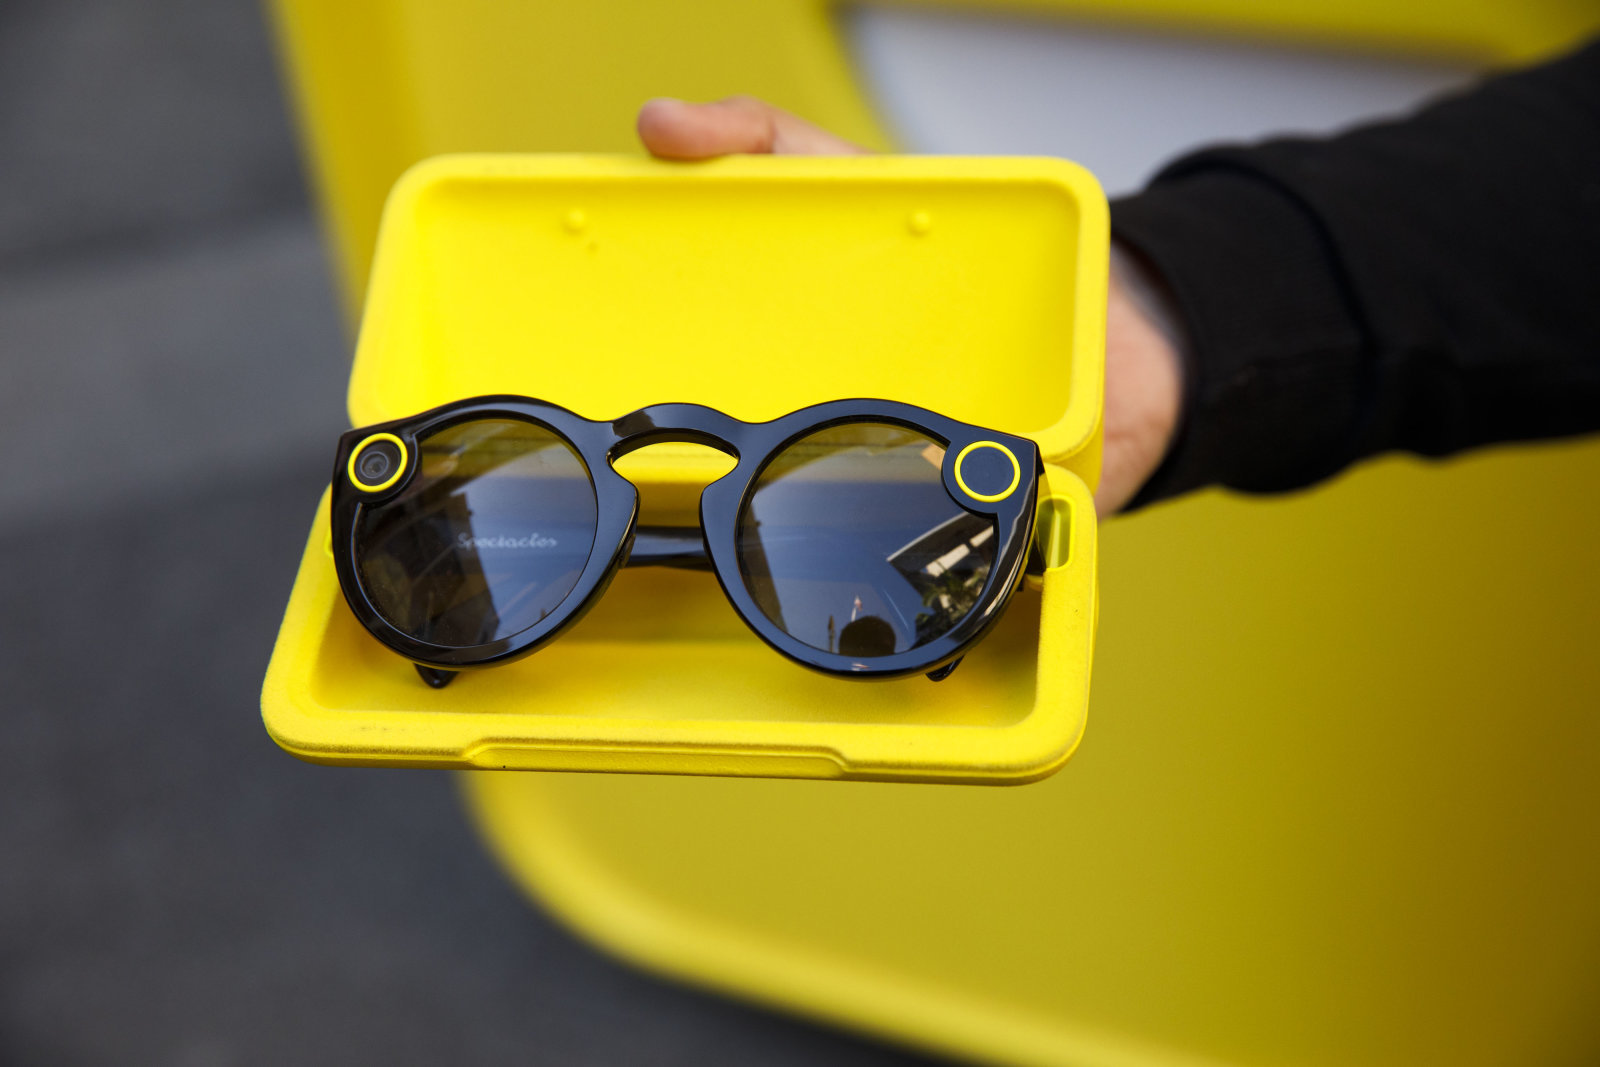 Snap is working on premium Spectacles with dual cameras, $350 price tag